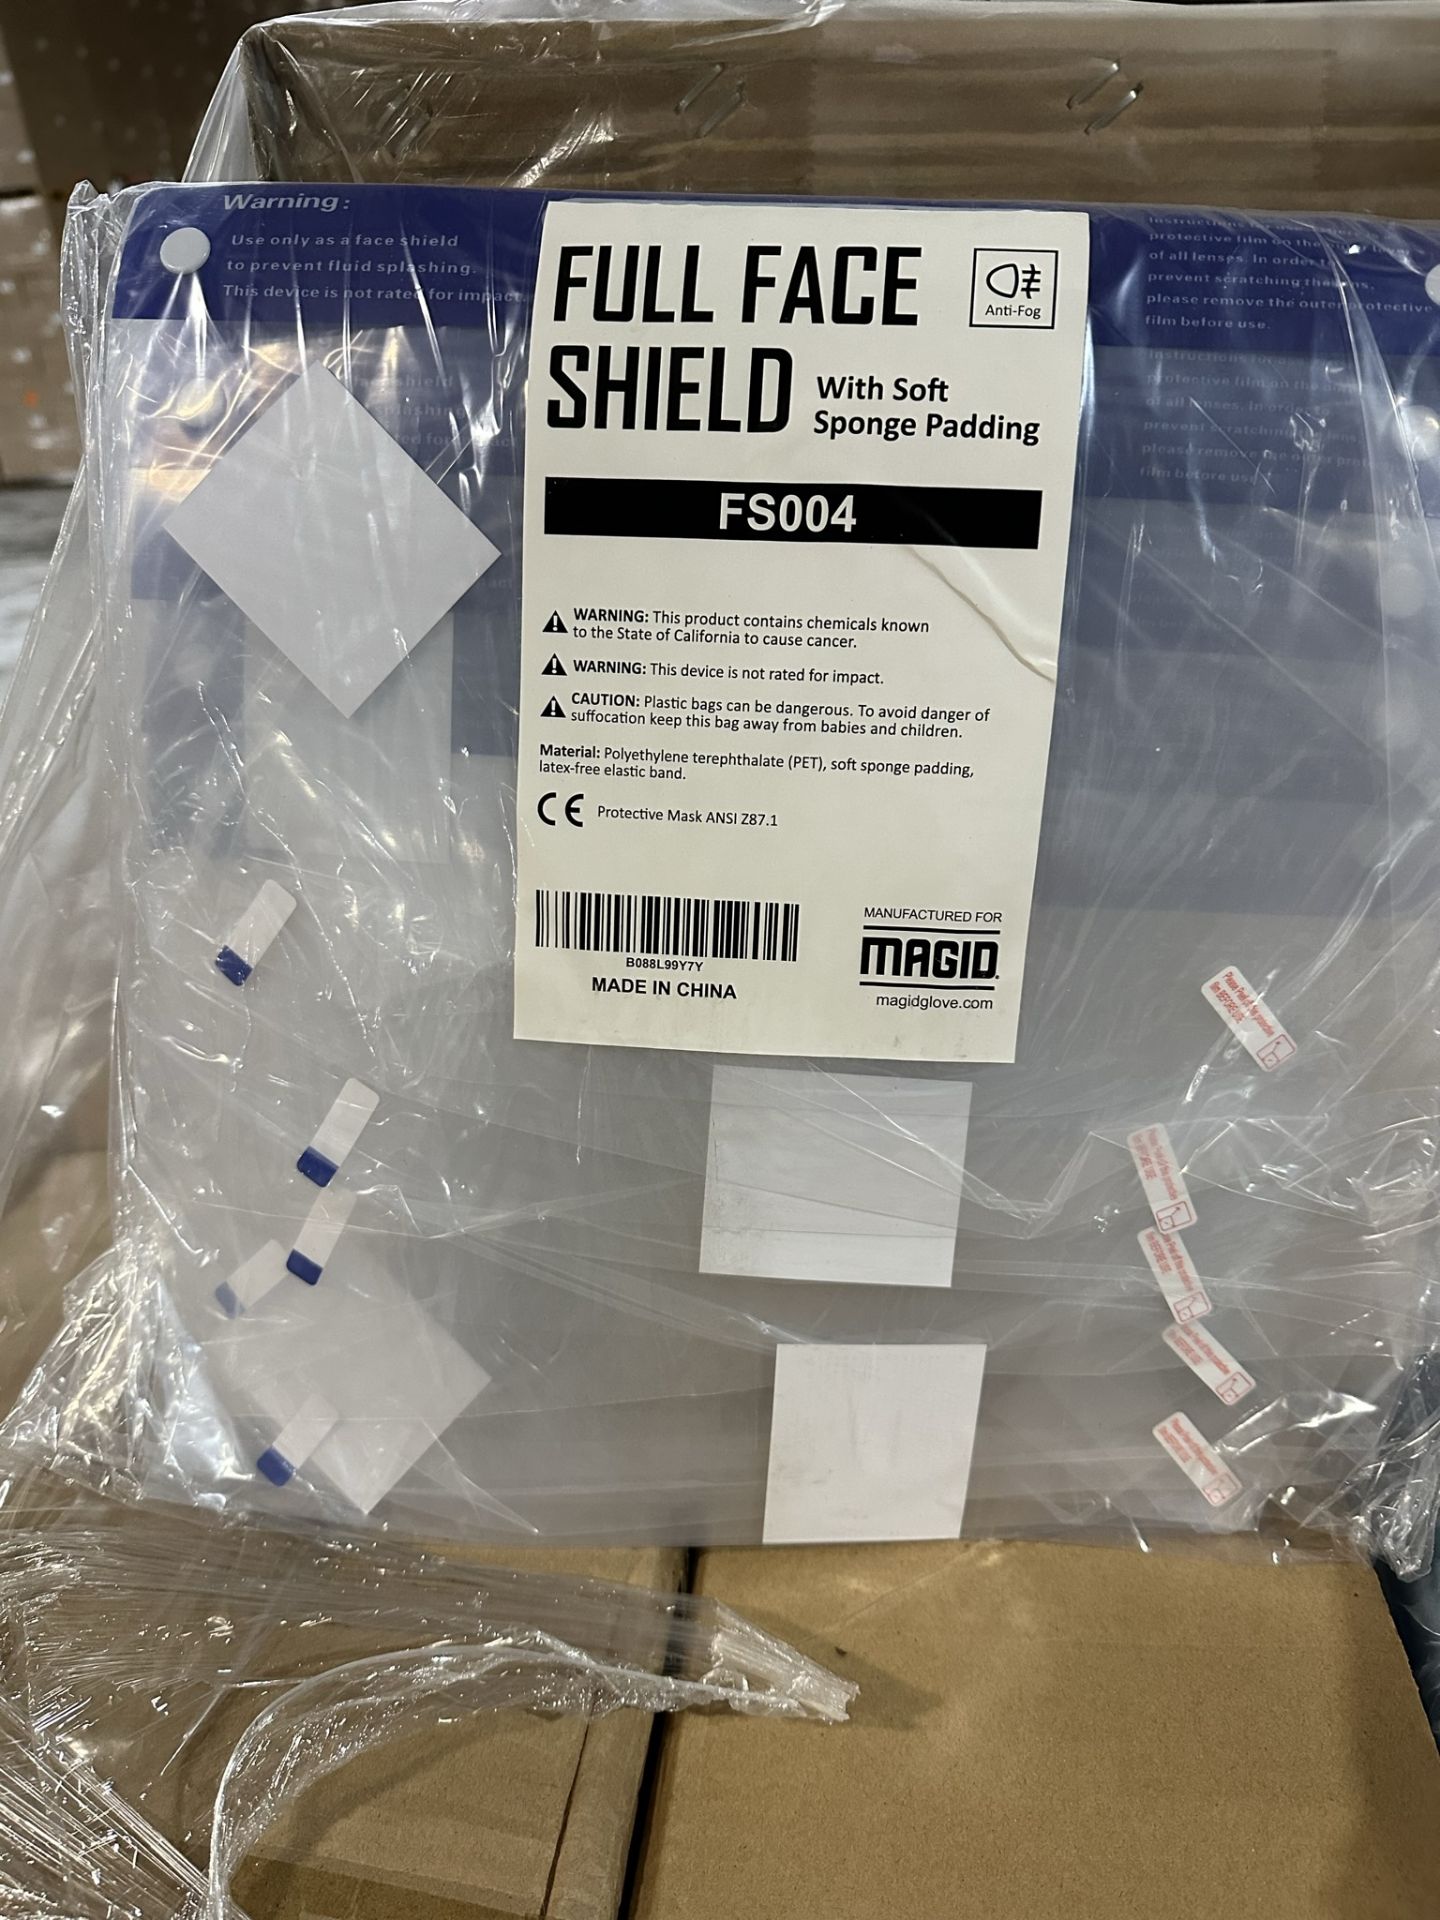 Lot of (100) Cases of Magid Full Face Shield with Soft Sponge Padding - Image 2 of 2